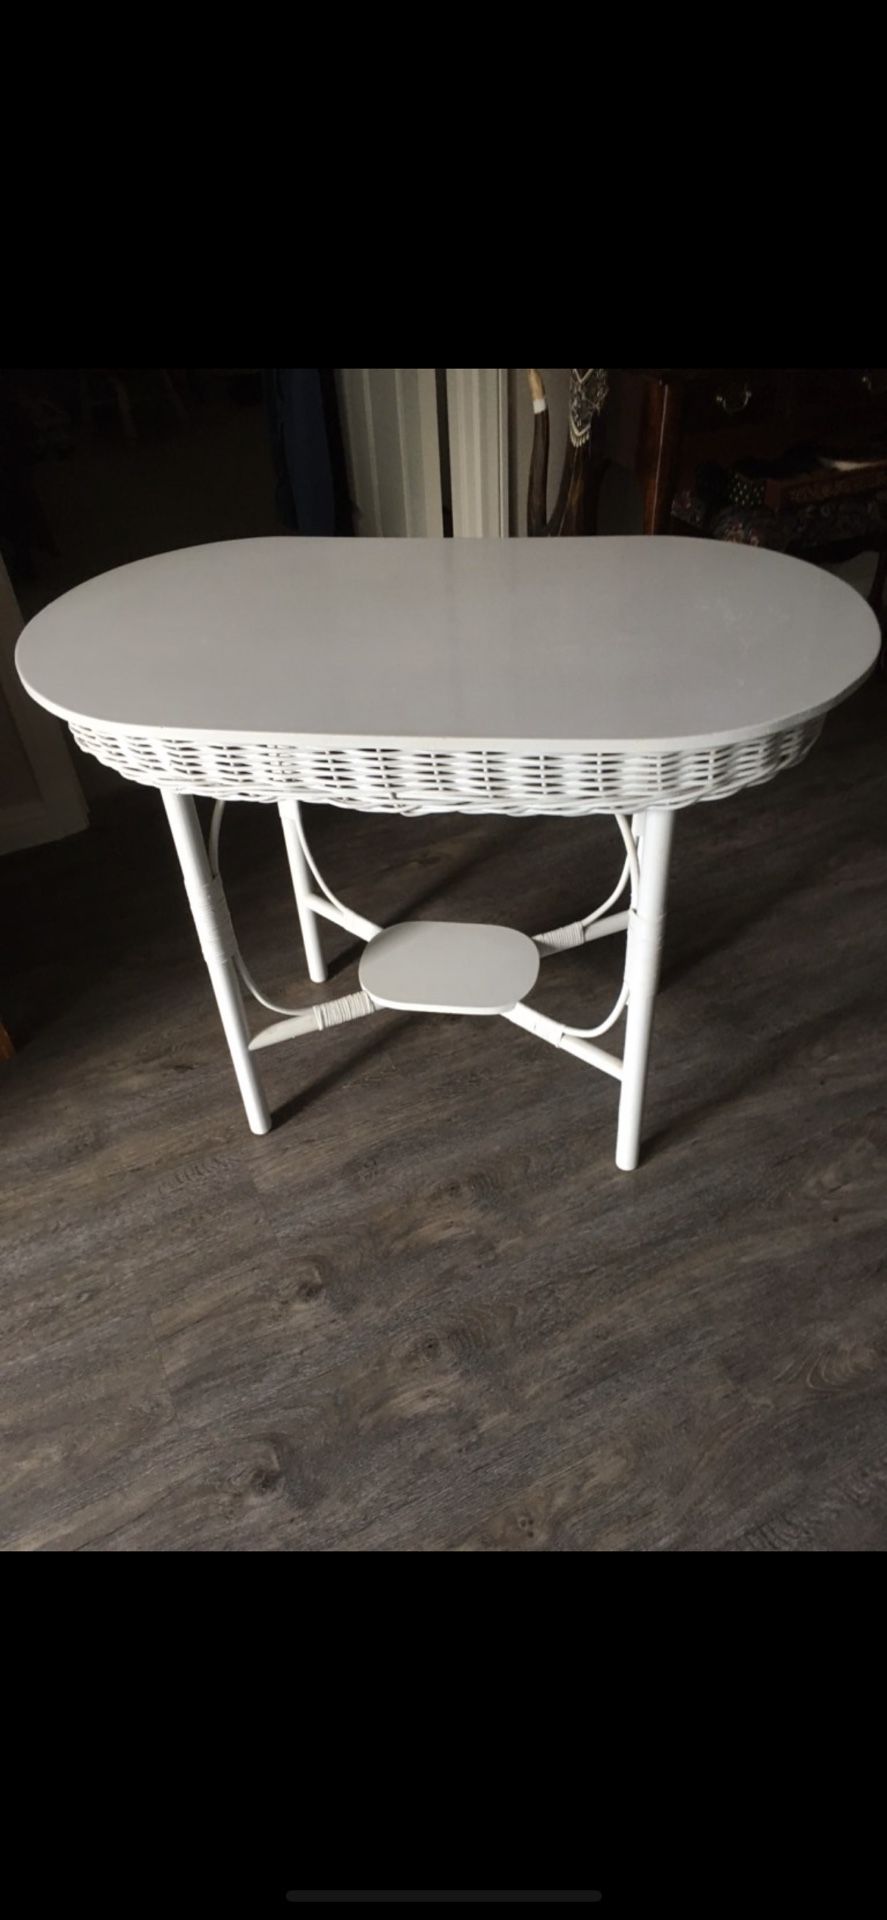 Wicker Table With Formica Top